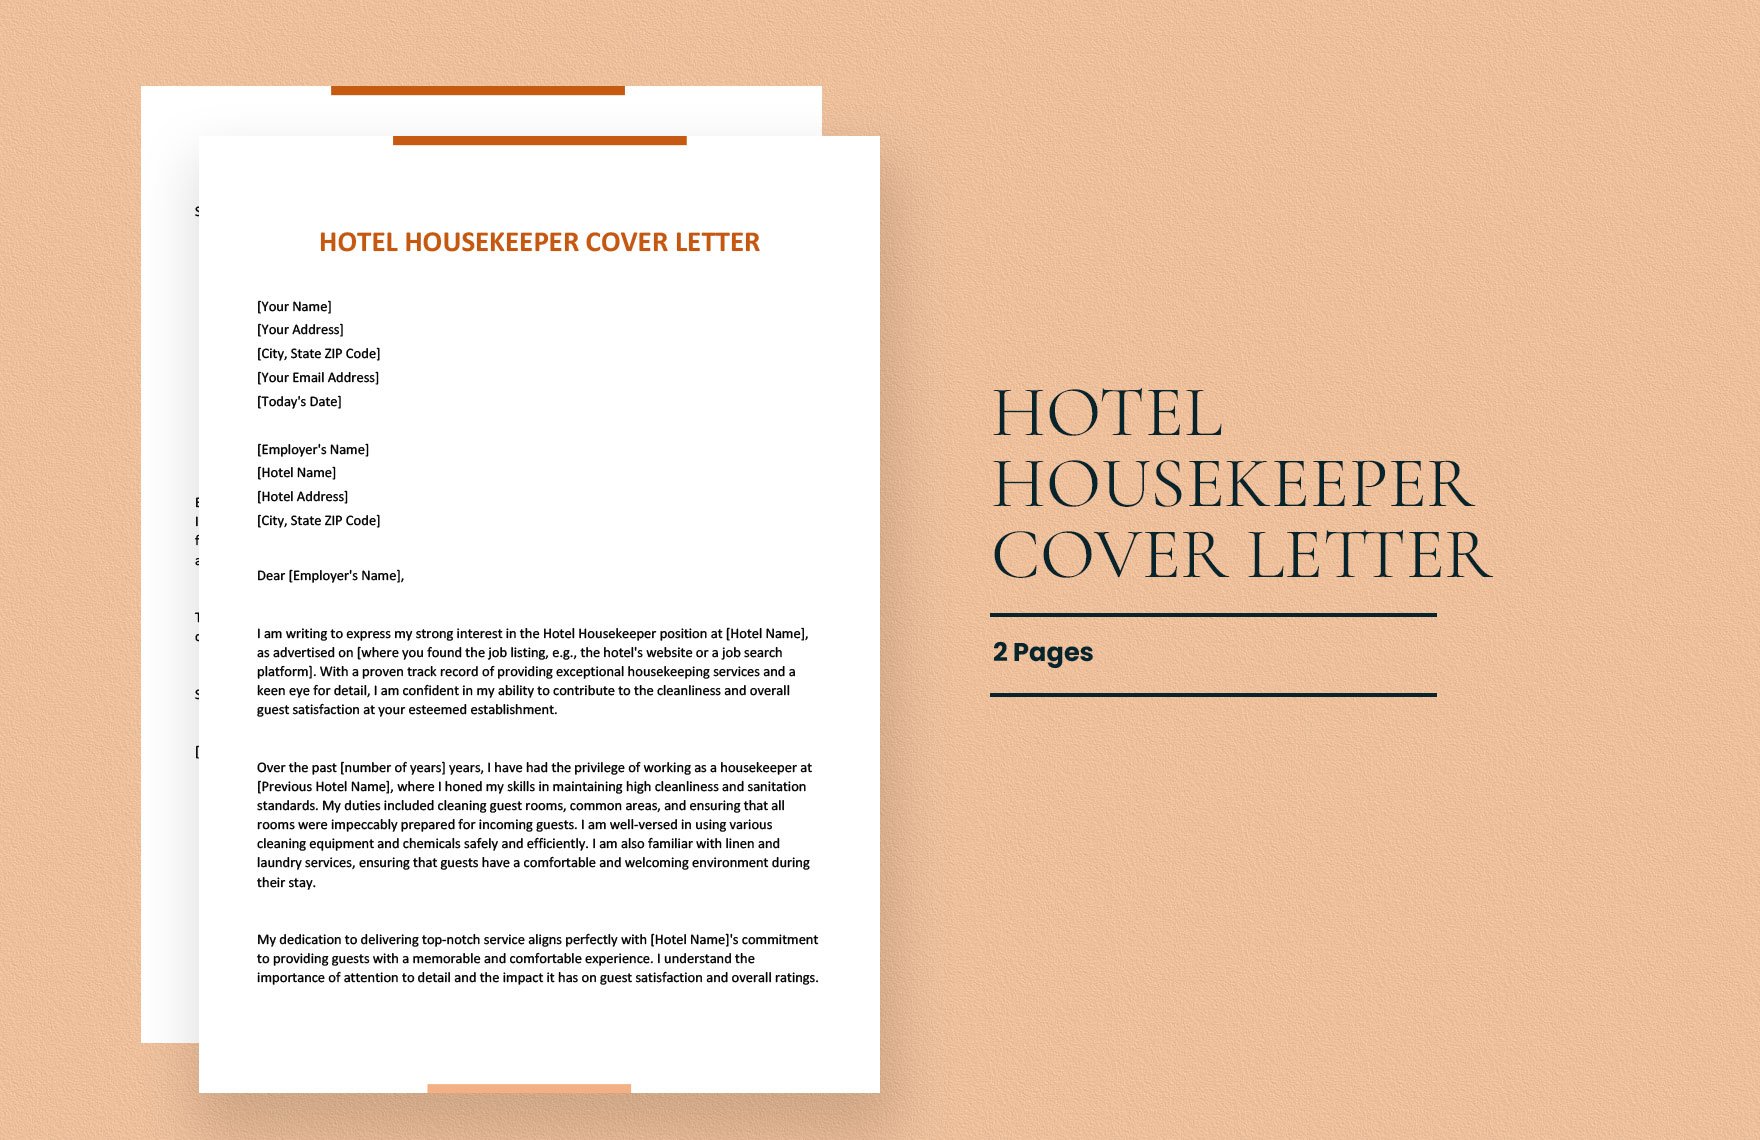 Hotel Housekeeper Cover Letter in Word, Google Docs